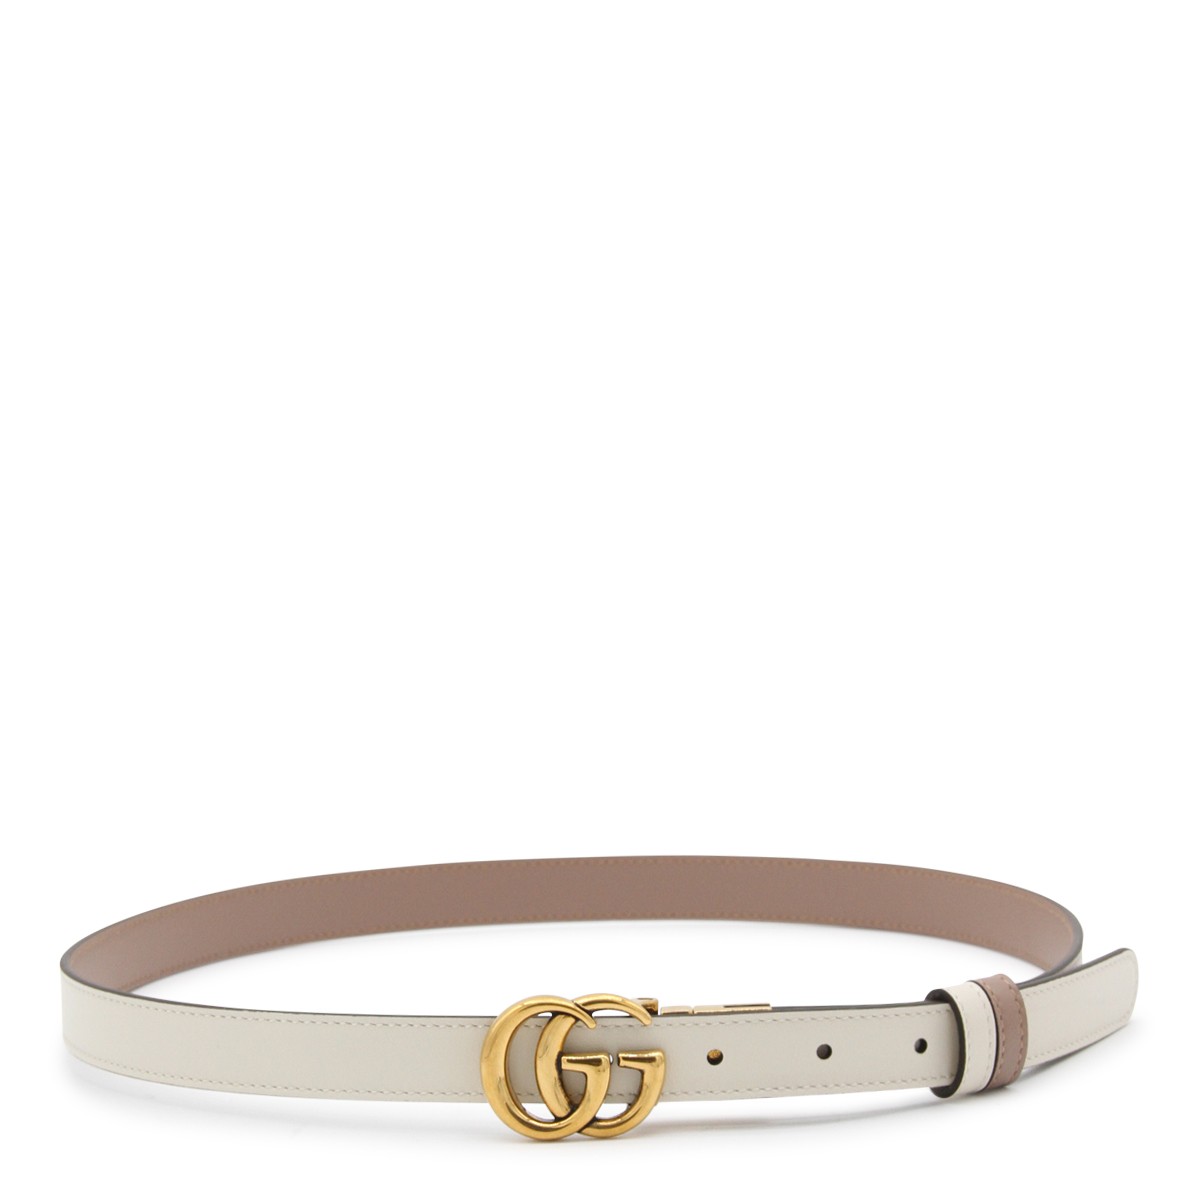 WHITE AND BEIGE LEATHER BELT